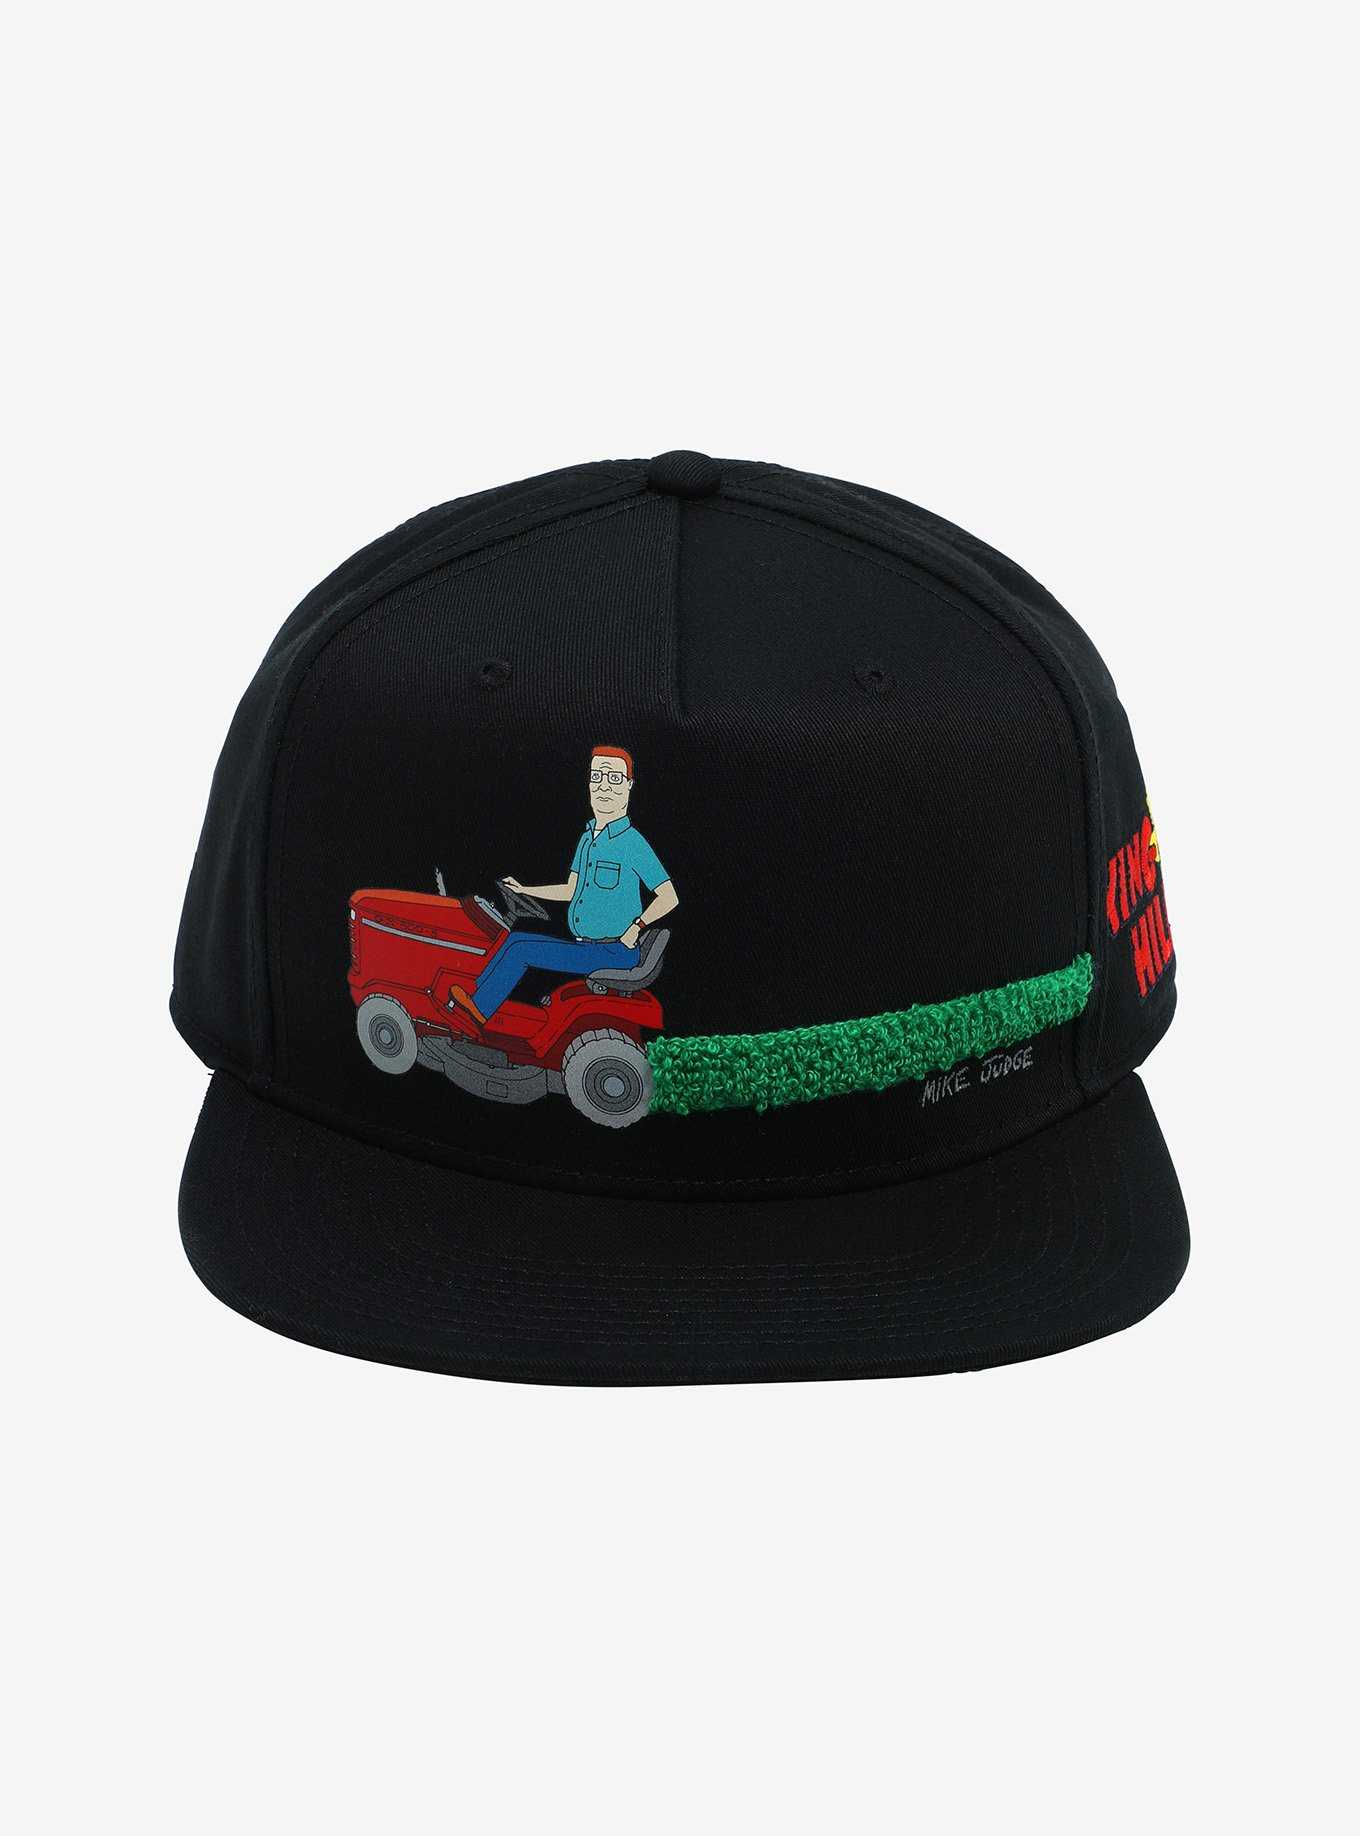 King Of The Hill Hank Hill Lawnmower Snapback Hat, , hi-res